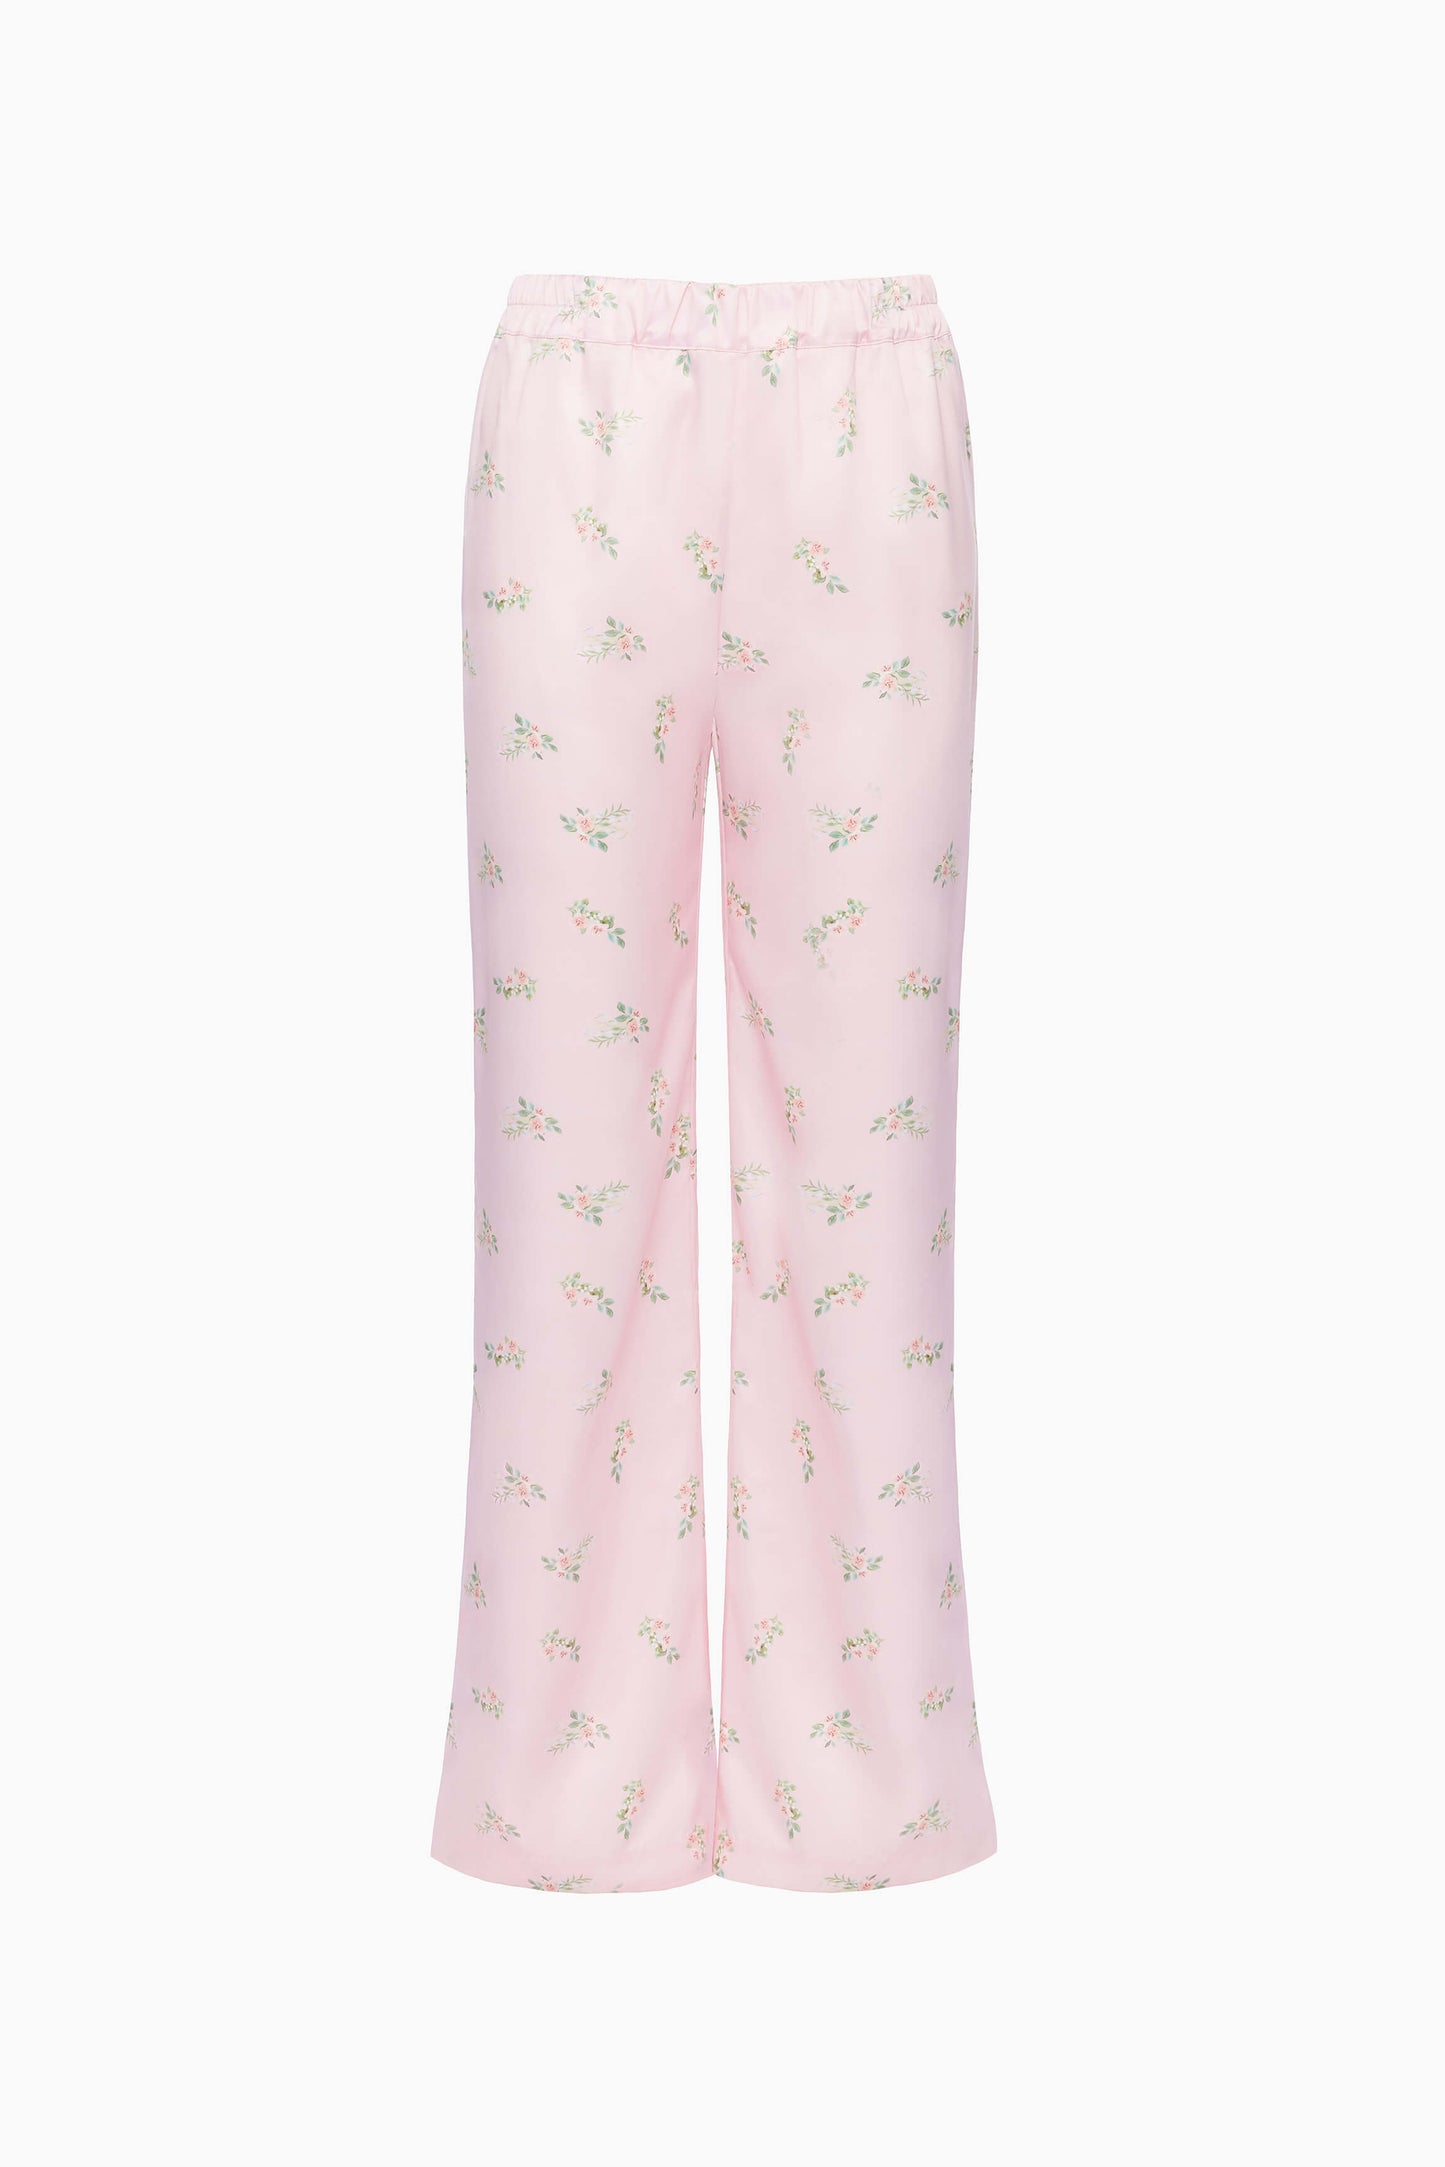 Blossom Printed Pants in Pink